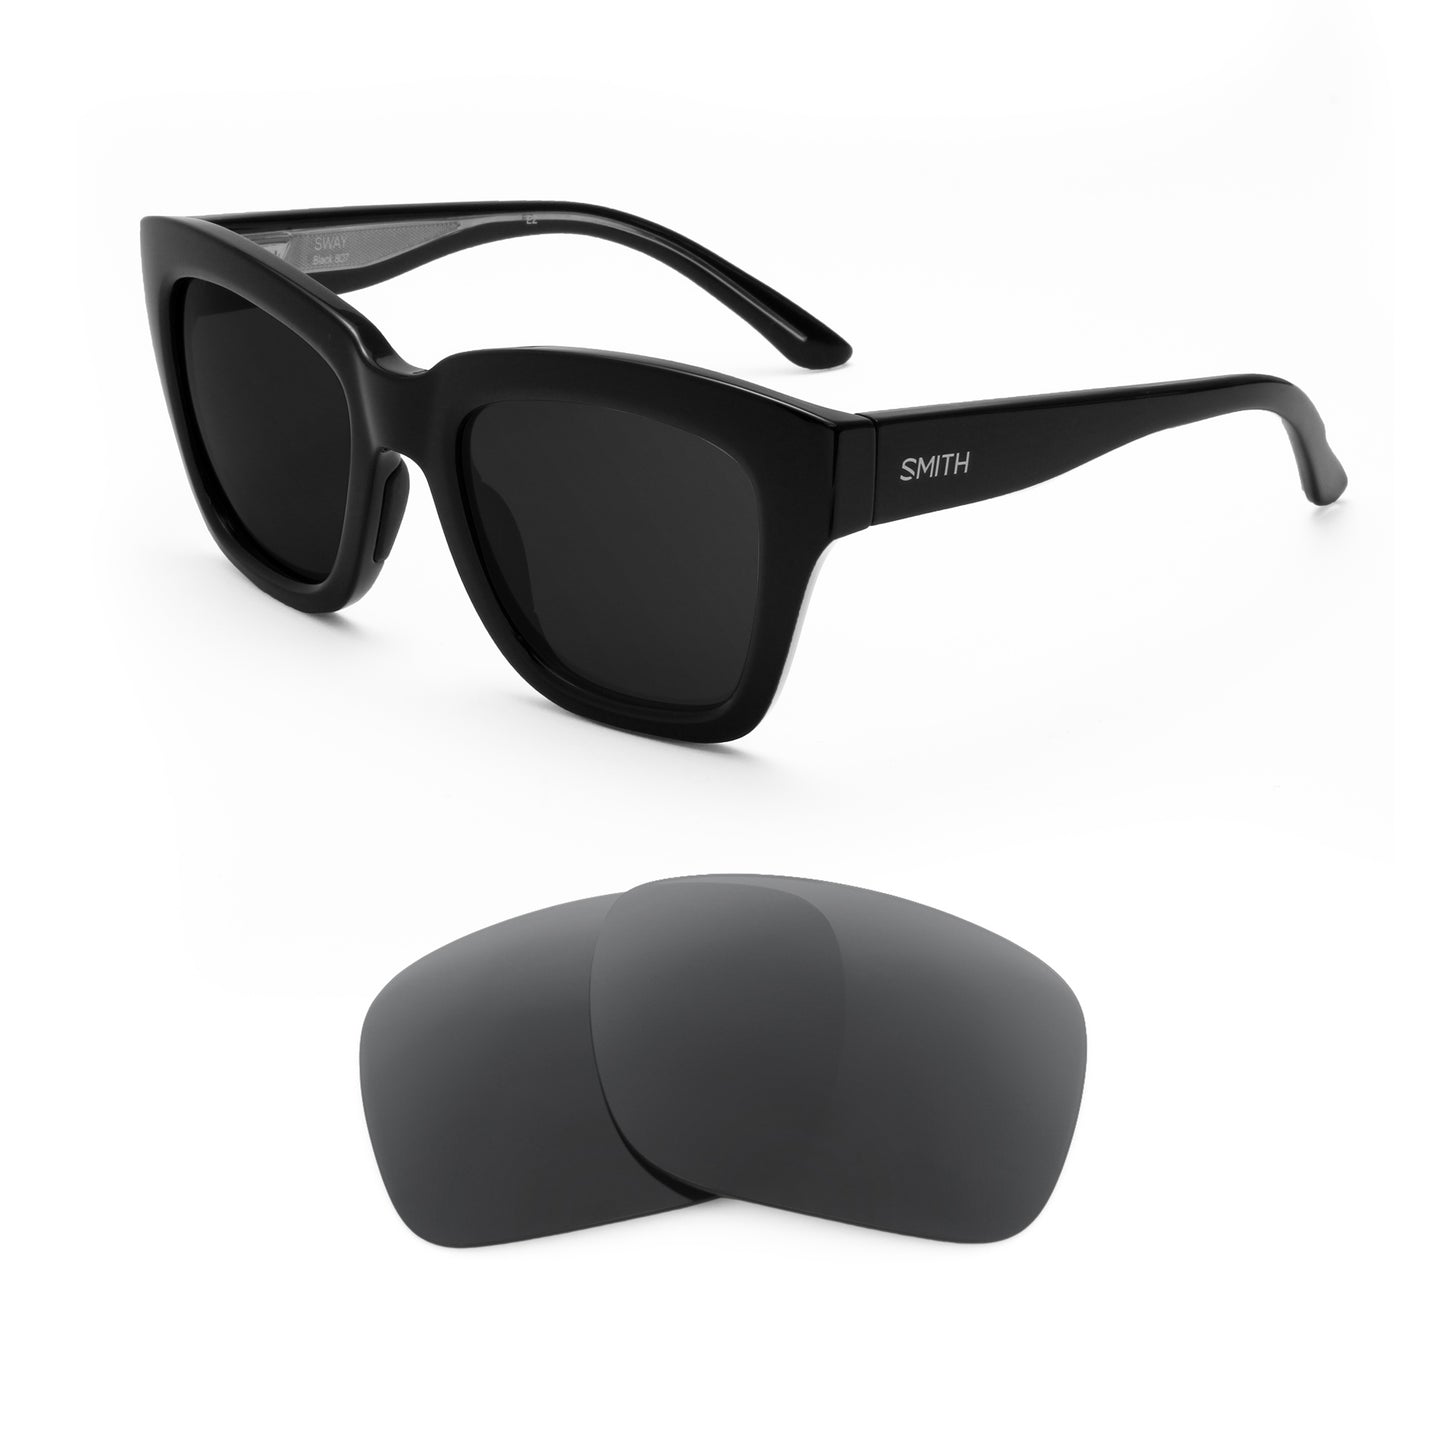 Smith Sway sunglasses with replacement lenses